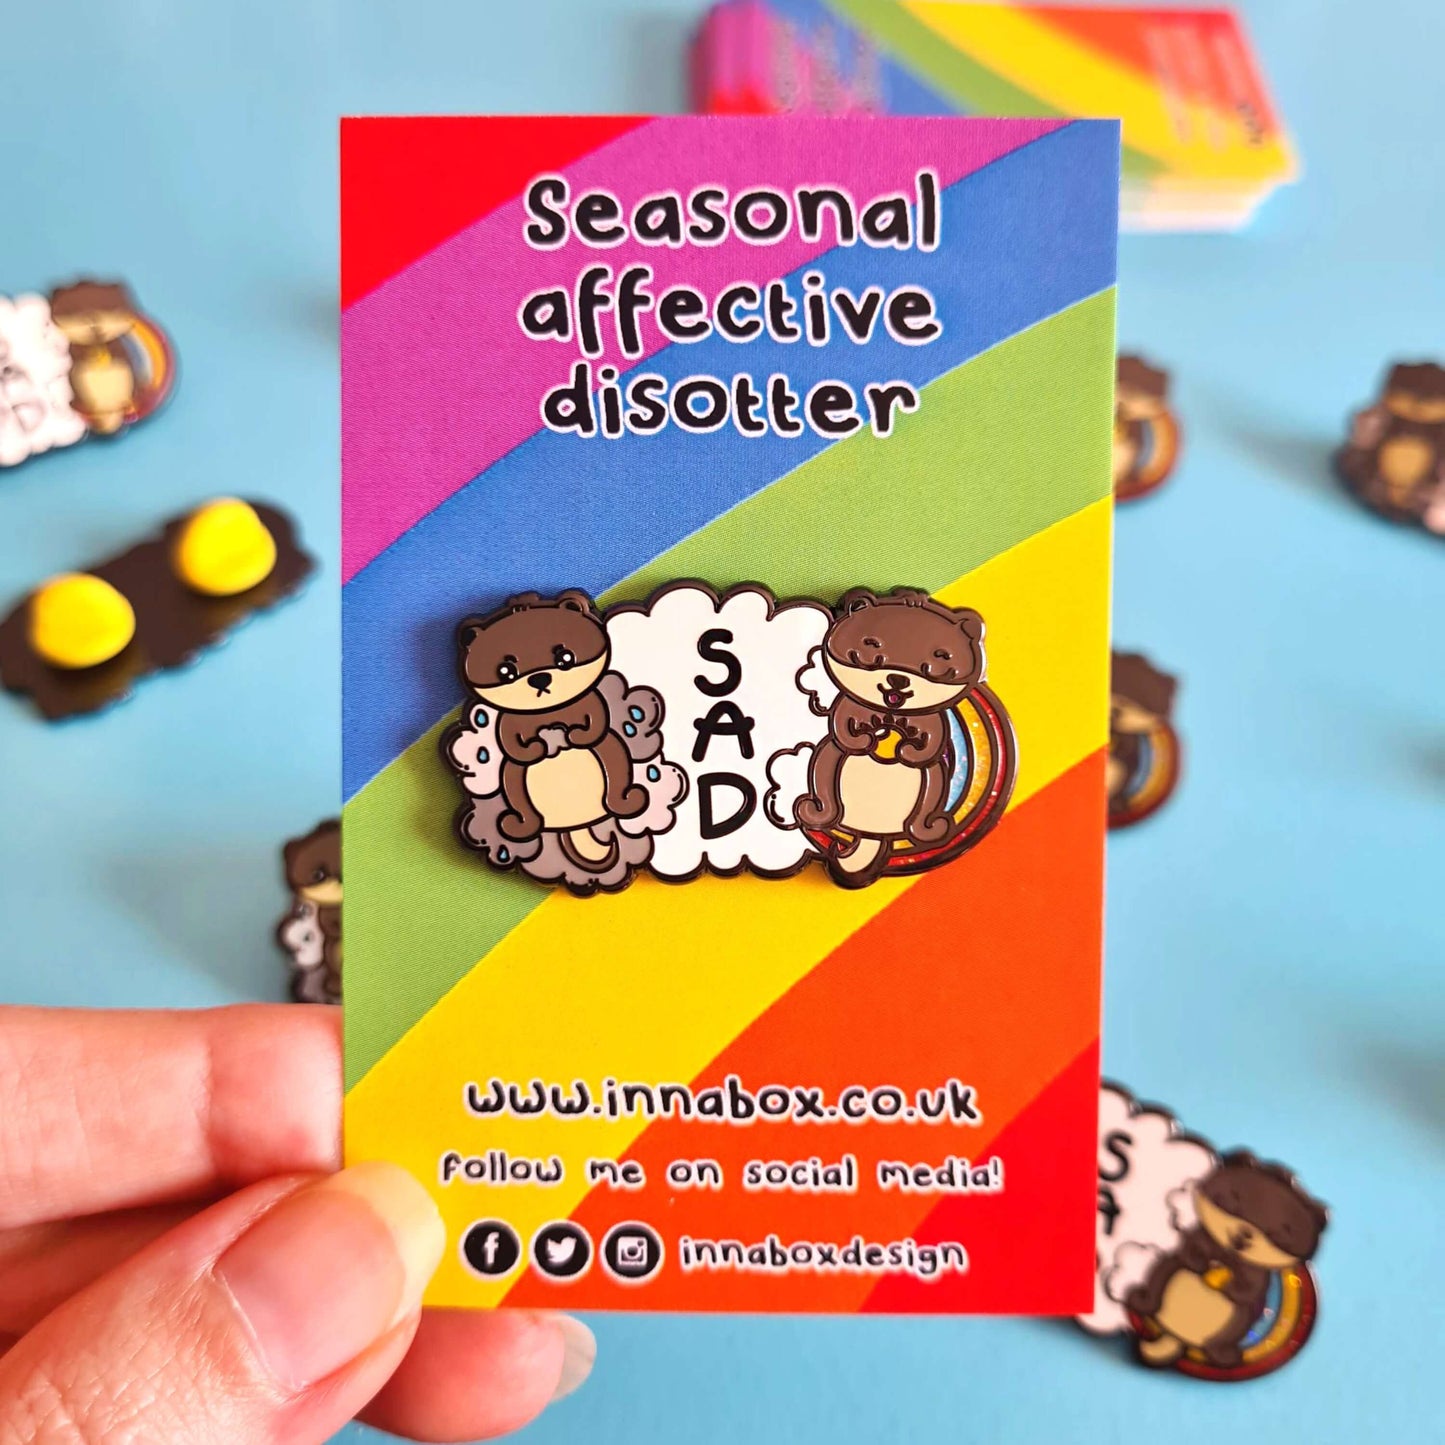 The Seasonal Affective Otter Enamel Pin - Seasonal Affective Disorder SAD on rainbow backing card being held over a blue background and multiple copies of the pin. The cloud shaped pin has two otters on either side, one sad on a raincloud clutching a raincloud and the other smiling on a rainbow clutching a sunshine. In the middle is the initials 'SAD'. The hand drawn design is raising awareness for Seasonal Affective Disorder.